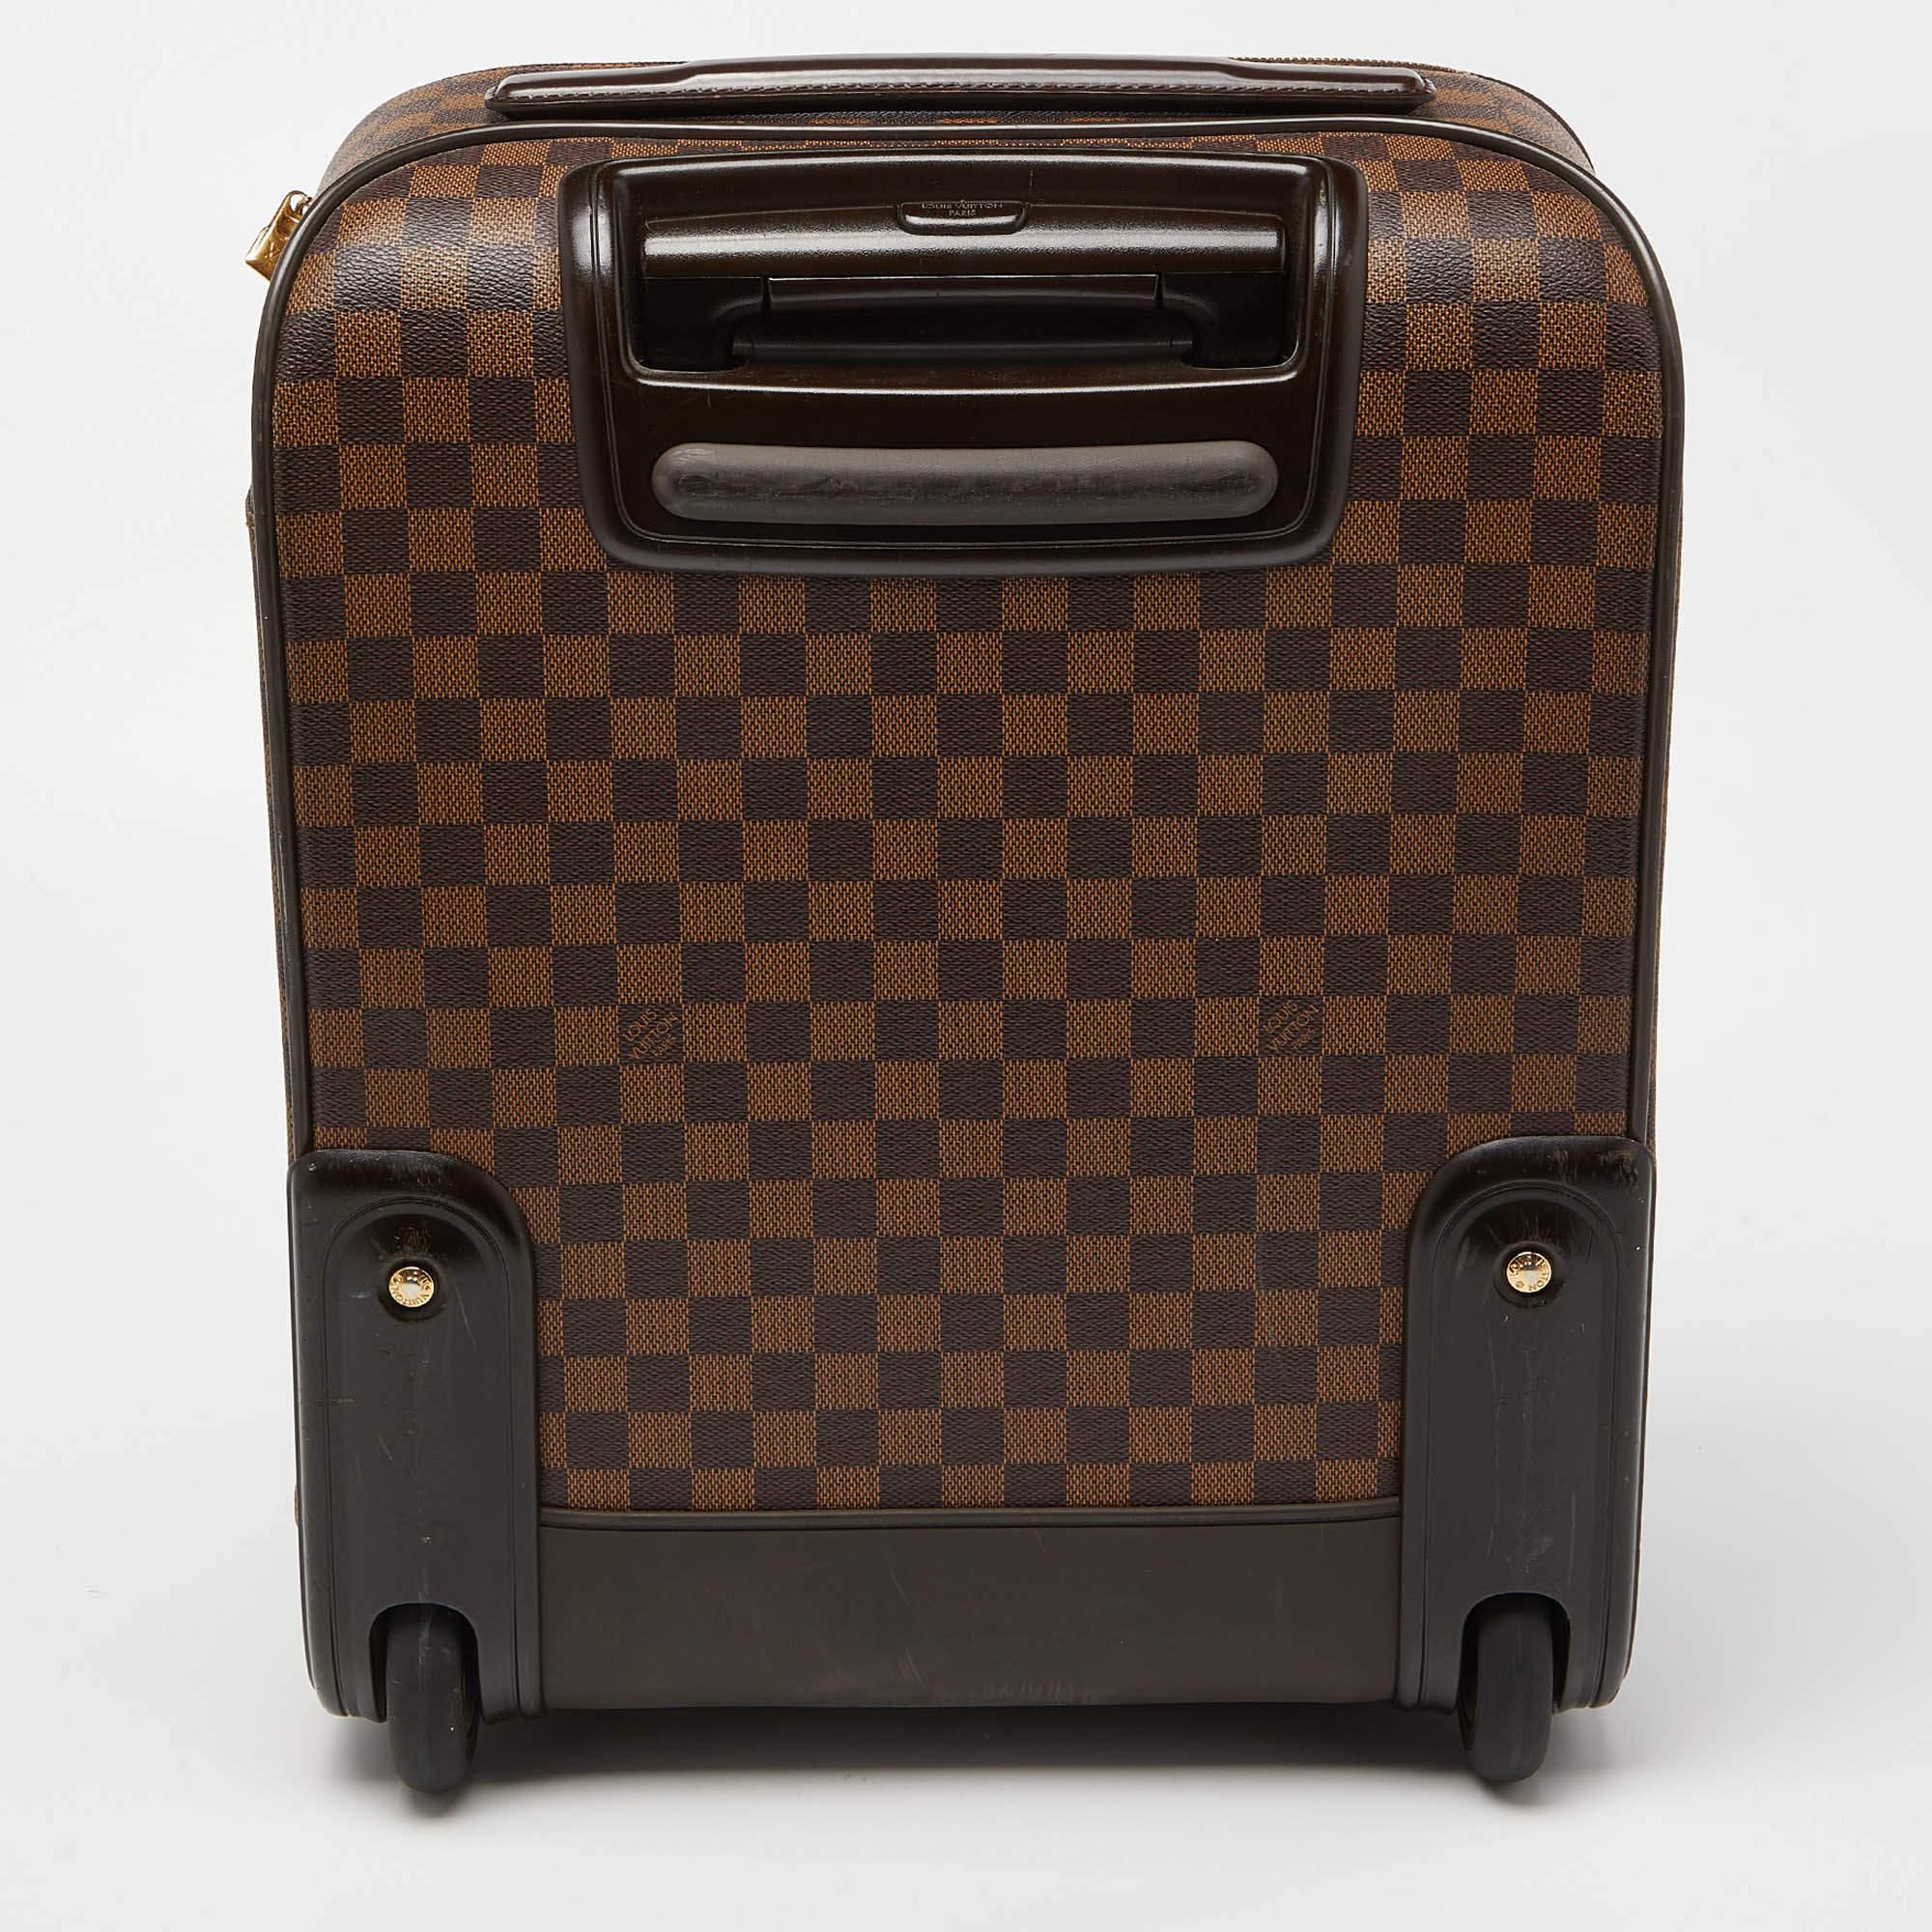 A traveling partner to trust and treasure is this one from Louis Vuitton. The exterior has been crafted from Damier Ebene canvas while the spacious interior is lined with nylon. The case is functional and reliable.

Includes: Original Dustbag